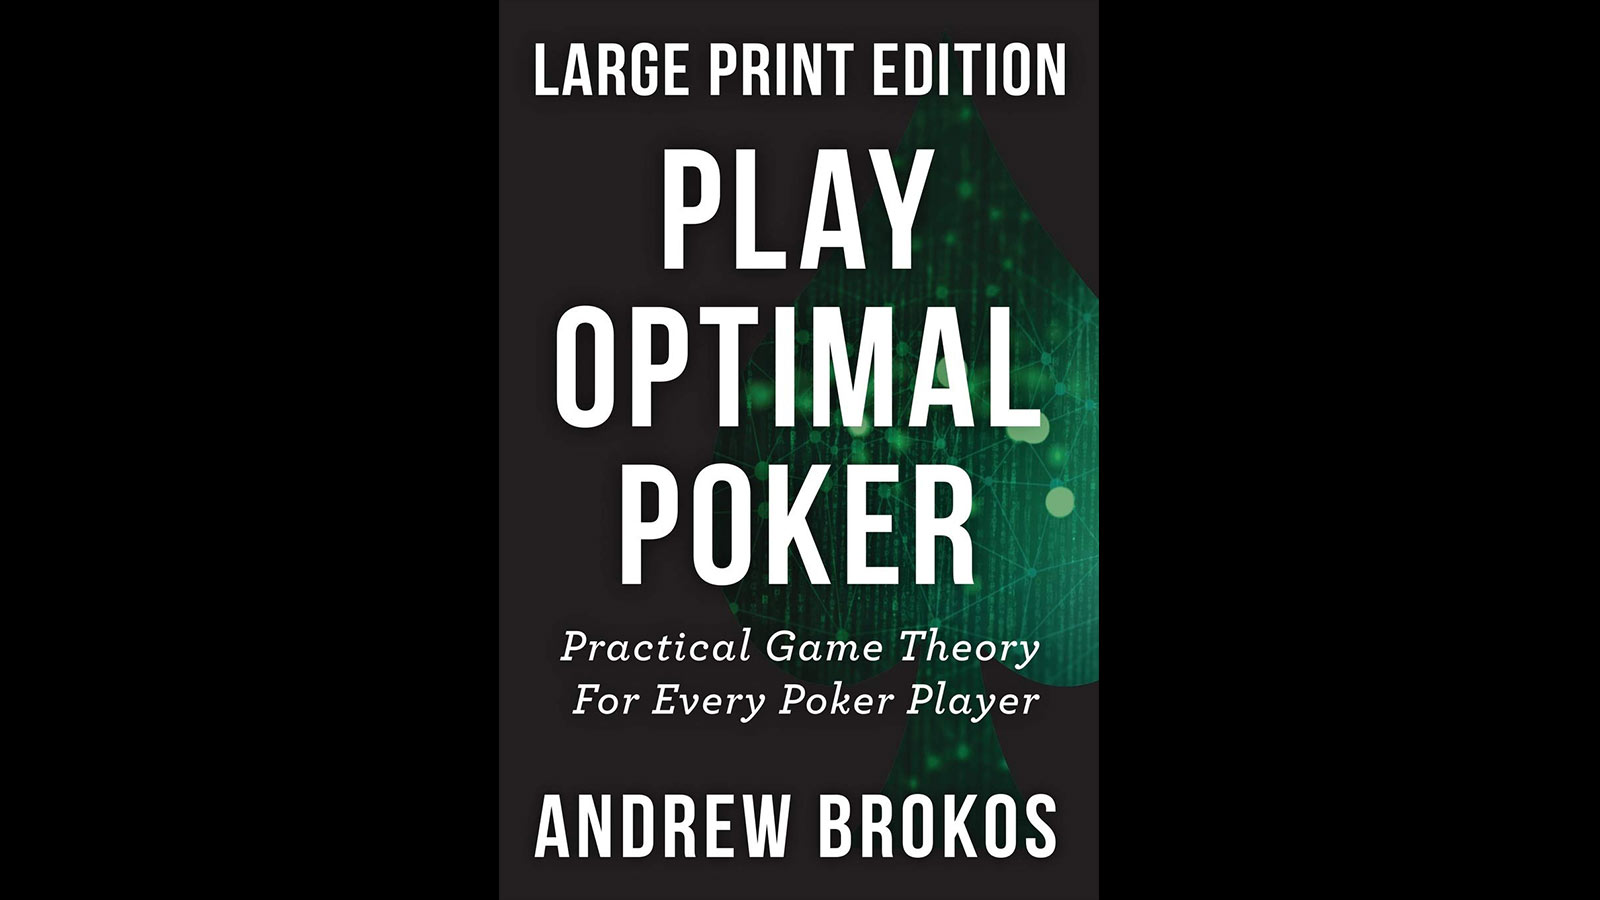 Play Optimal Poker Practical Game Theory for Every Poker Player